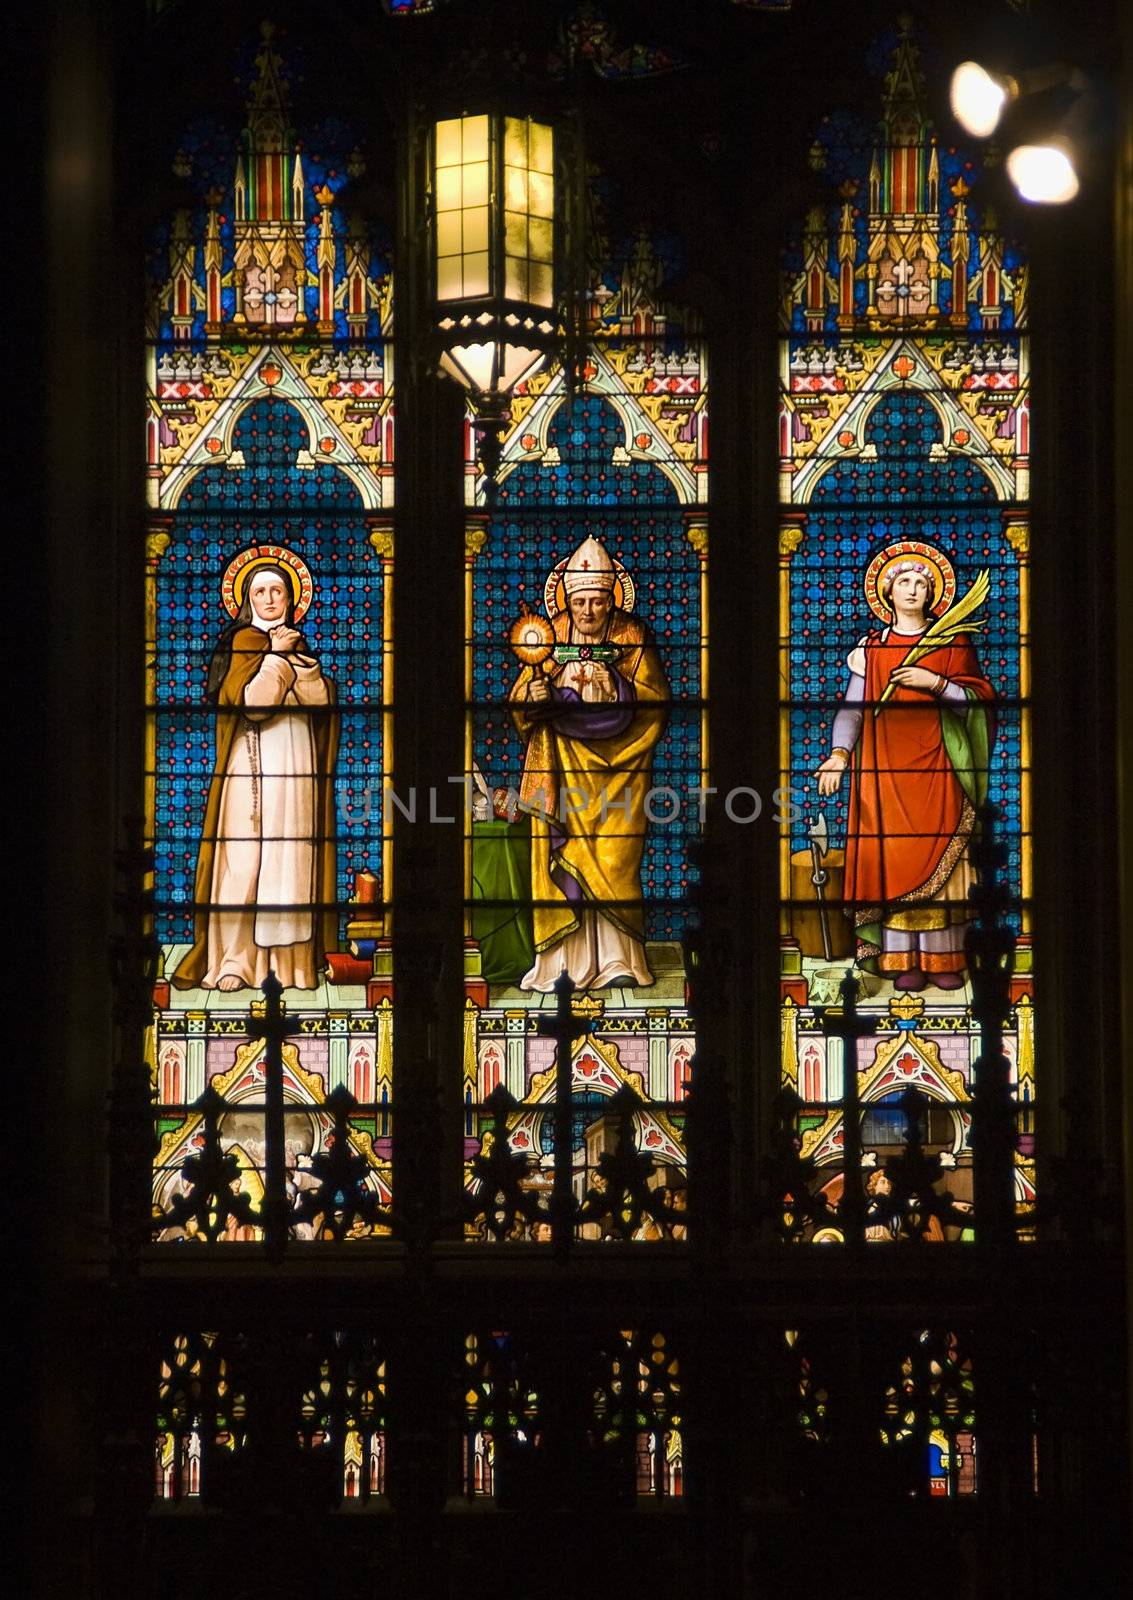 Saints Pope Stained Glass Long St. Patrick's Cathedral New York by bill_perry